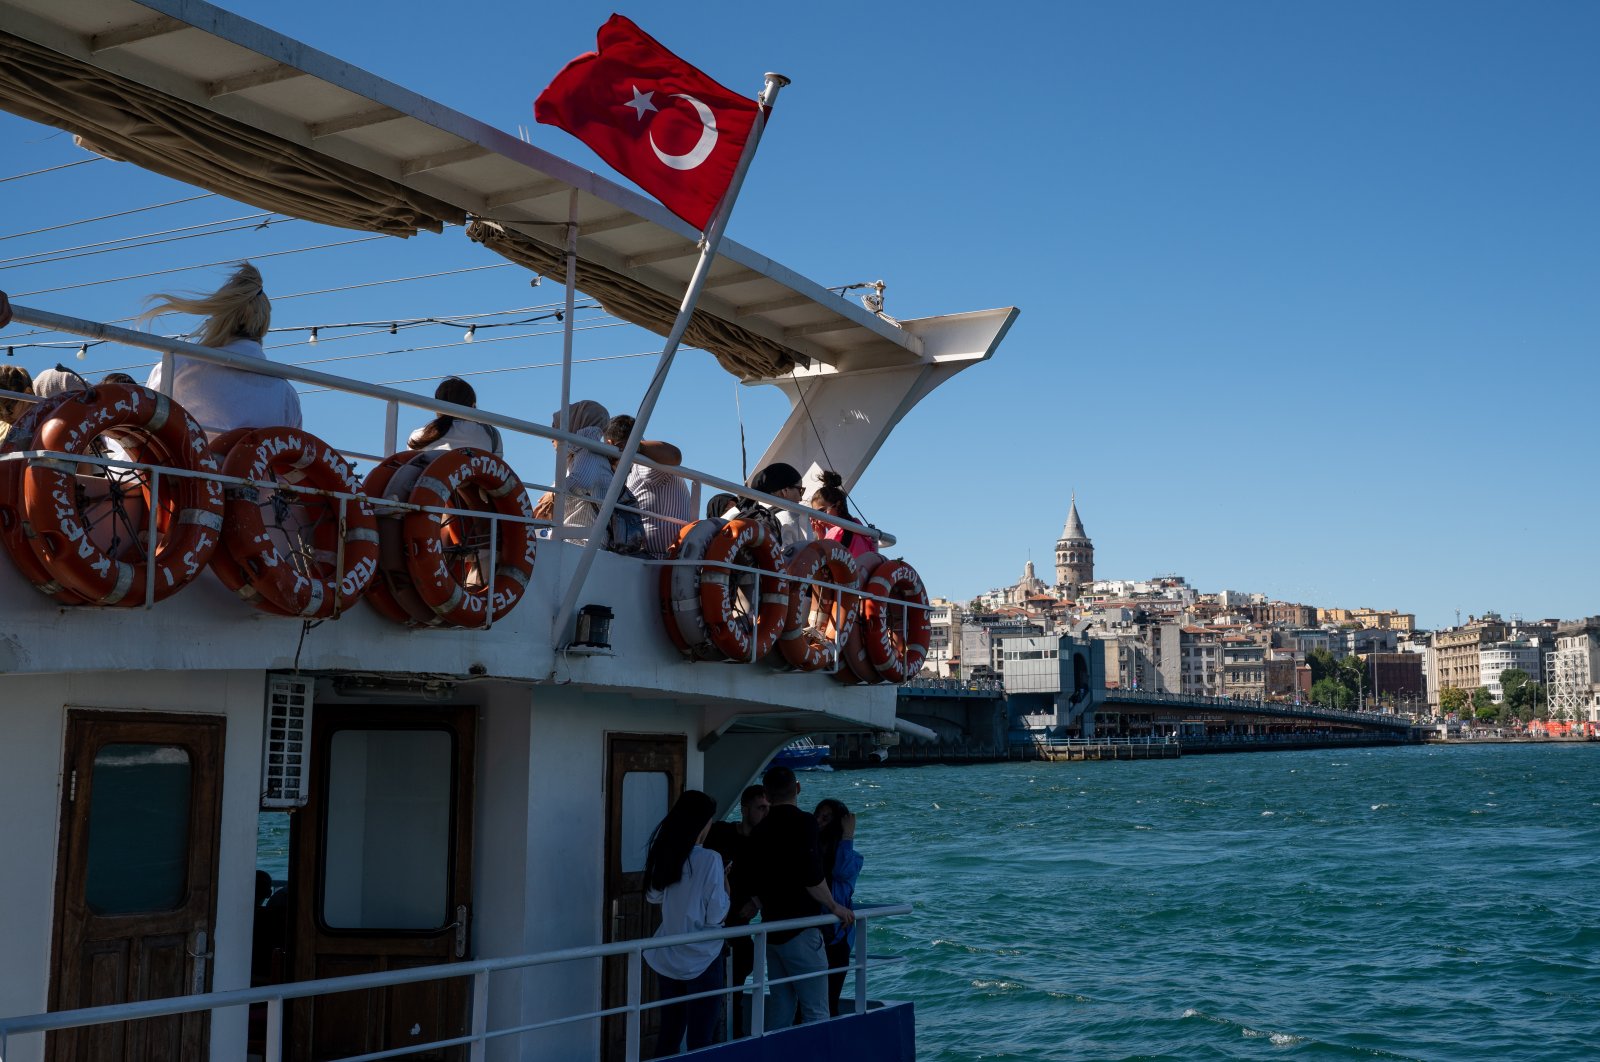 People are seen at a Bosporus ferry with the Galata Tower seen in the background, in the downtown of Istanbul, Turkey, July 3, 2022. (Reuters Photo)